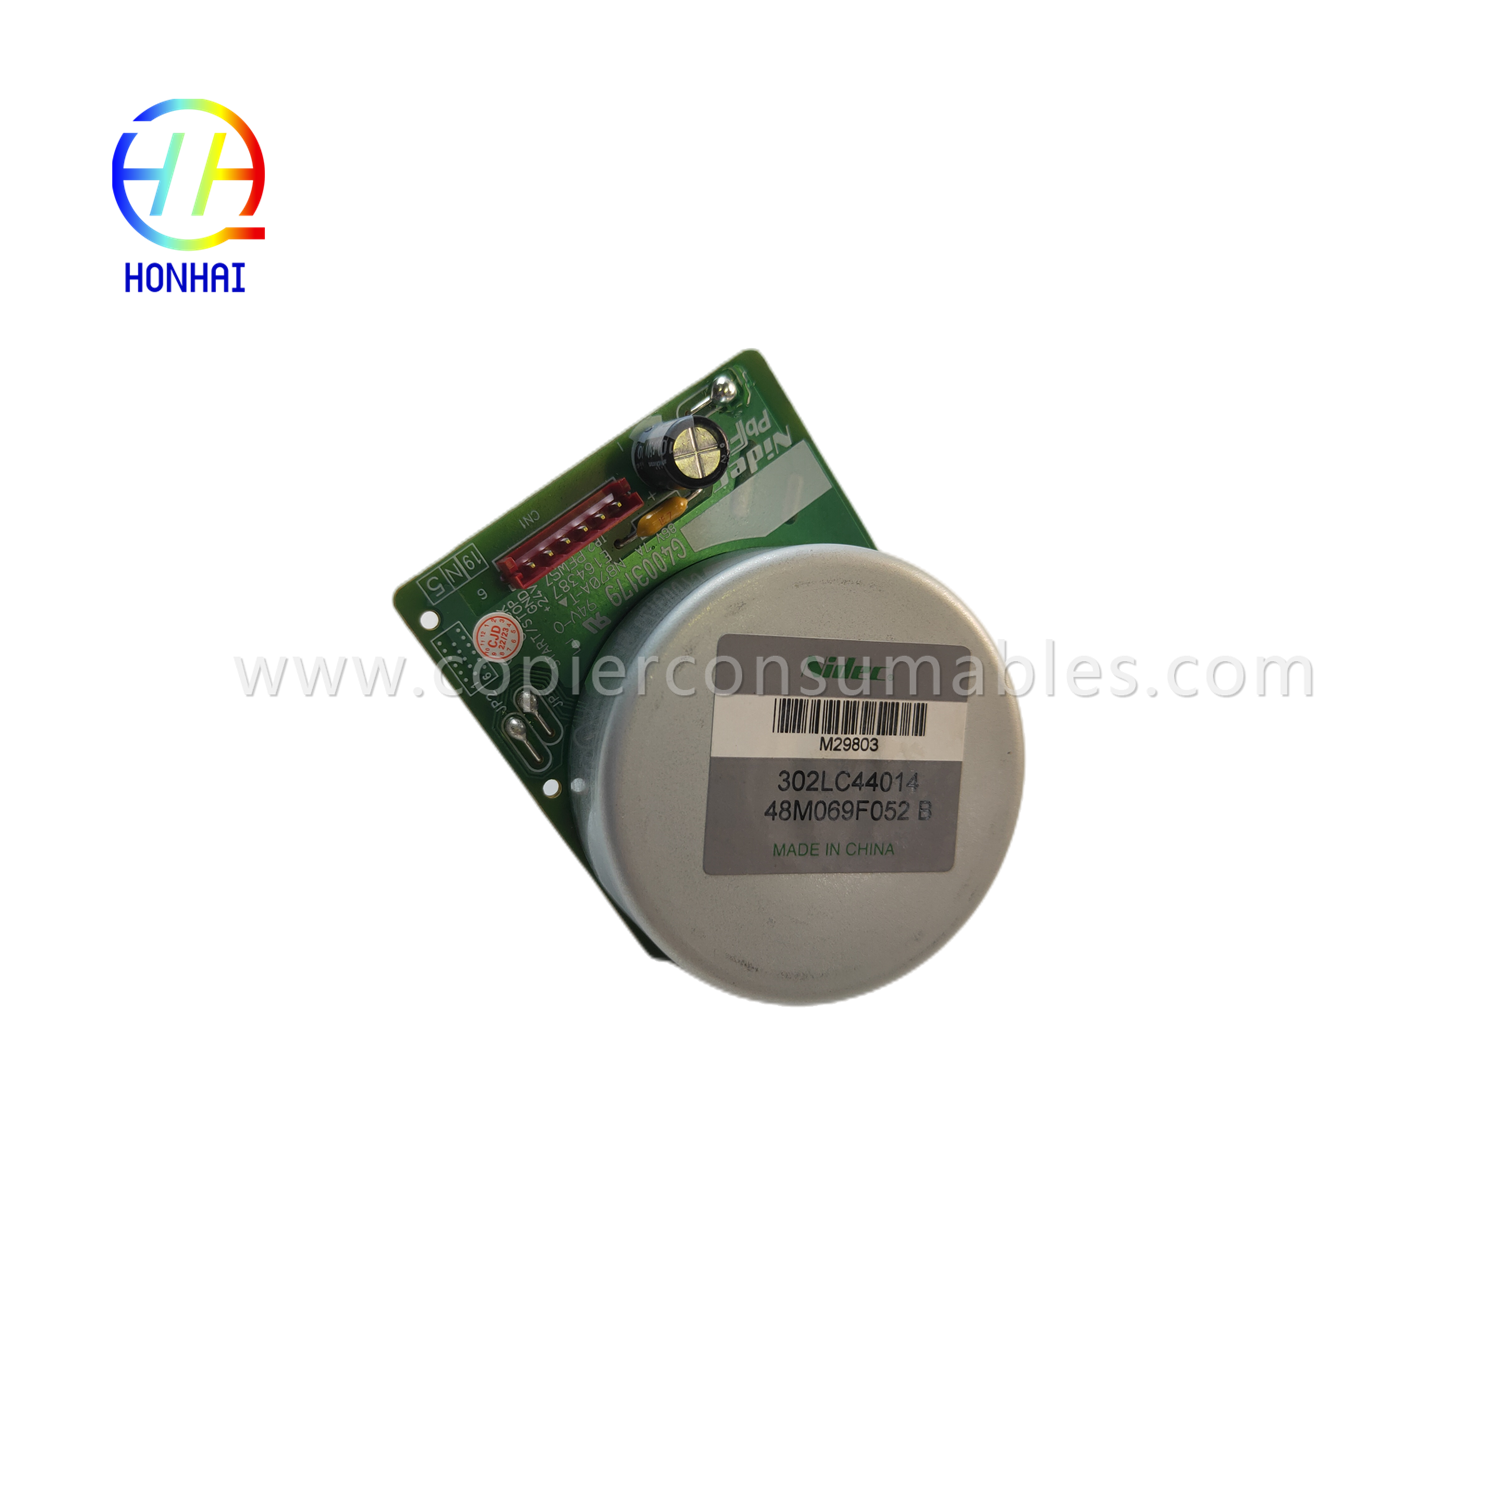 https://www.copierconsumables.com/motor-for-kyocera-ecosys-serie-parts-nr-302lc44014-48m069f052-b-product/